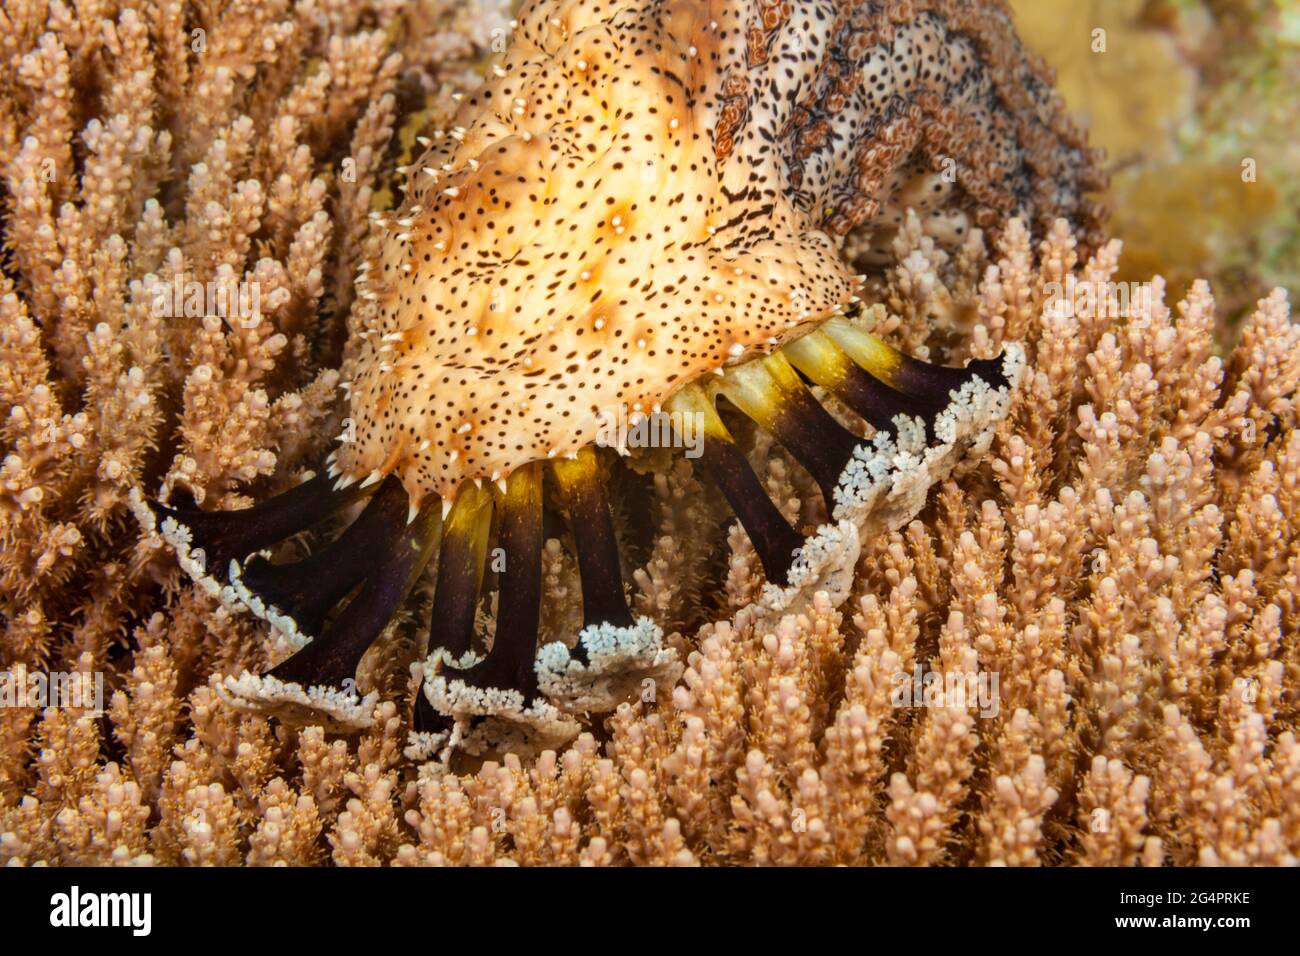 Graeff's Sea Cucumber, Pearsonothuria graeffei, previously known as Bohadschia graeffei. This image shows the tentacles, also known as mop, of this ad Stock Photo